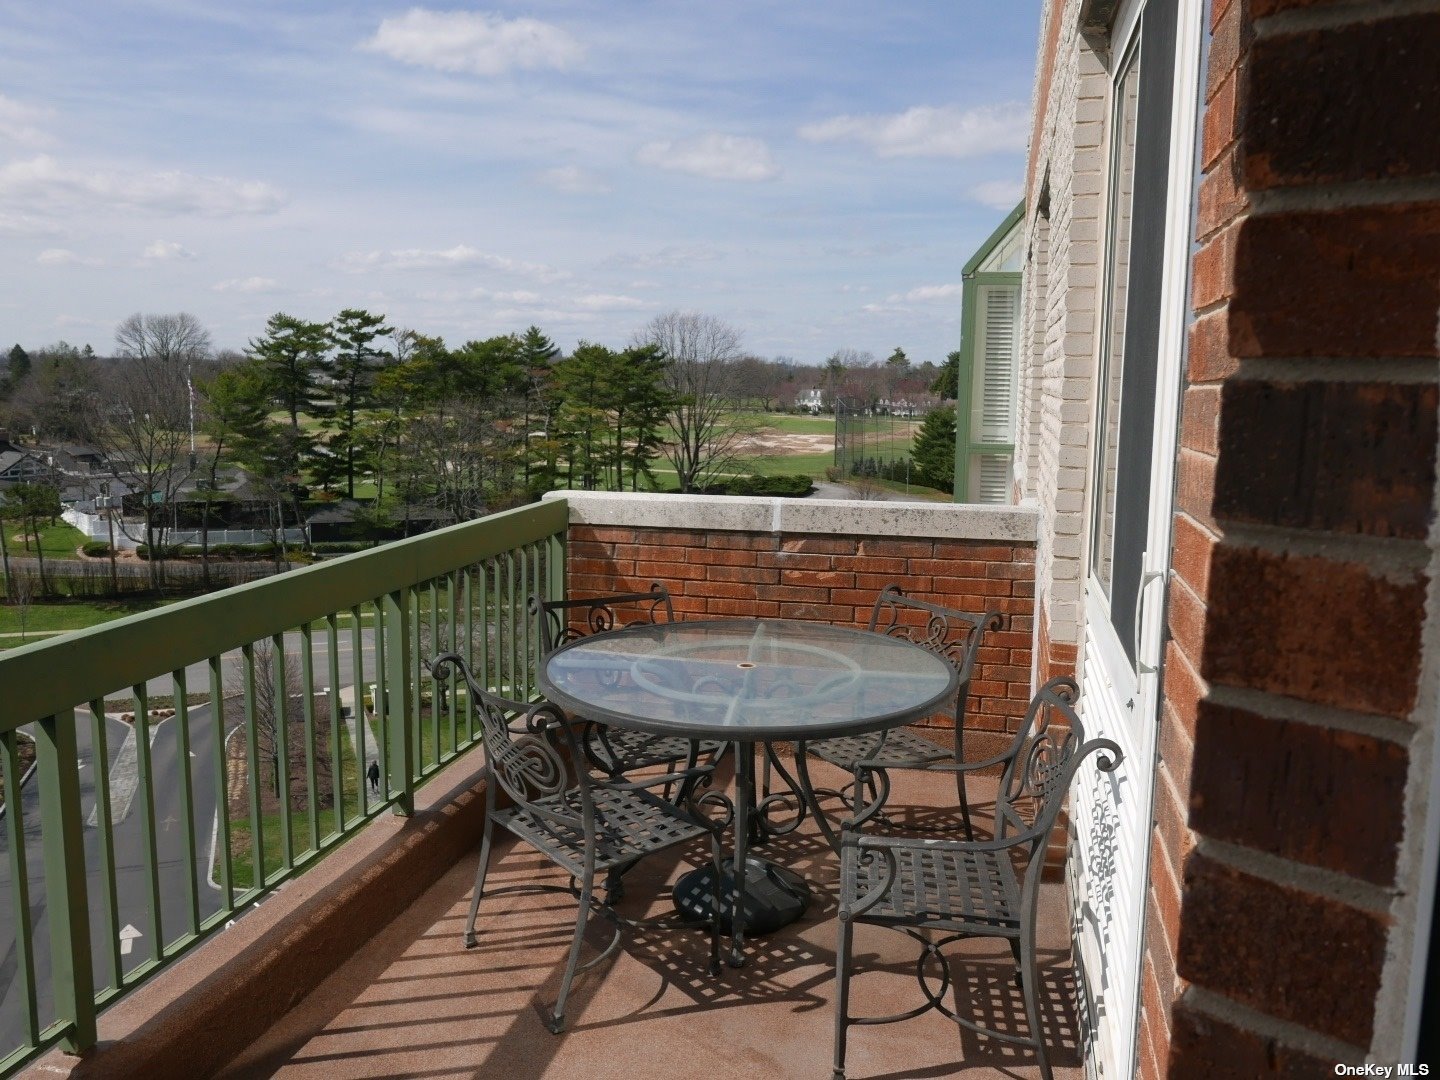 a view of a balcony with furniture